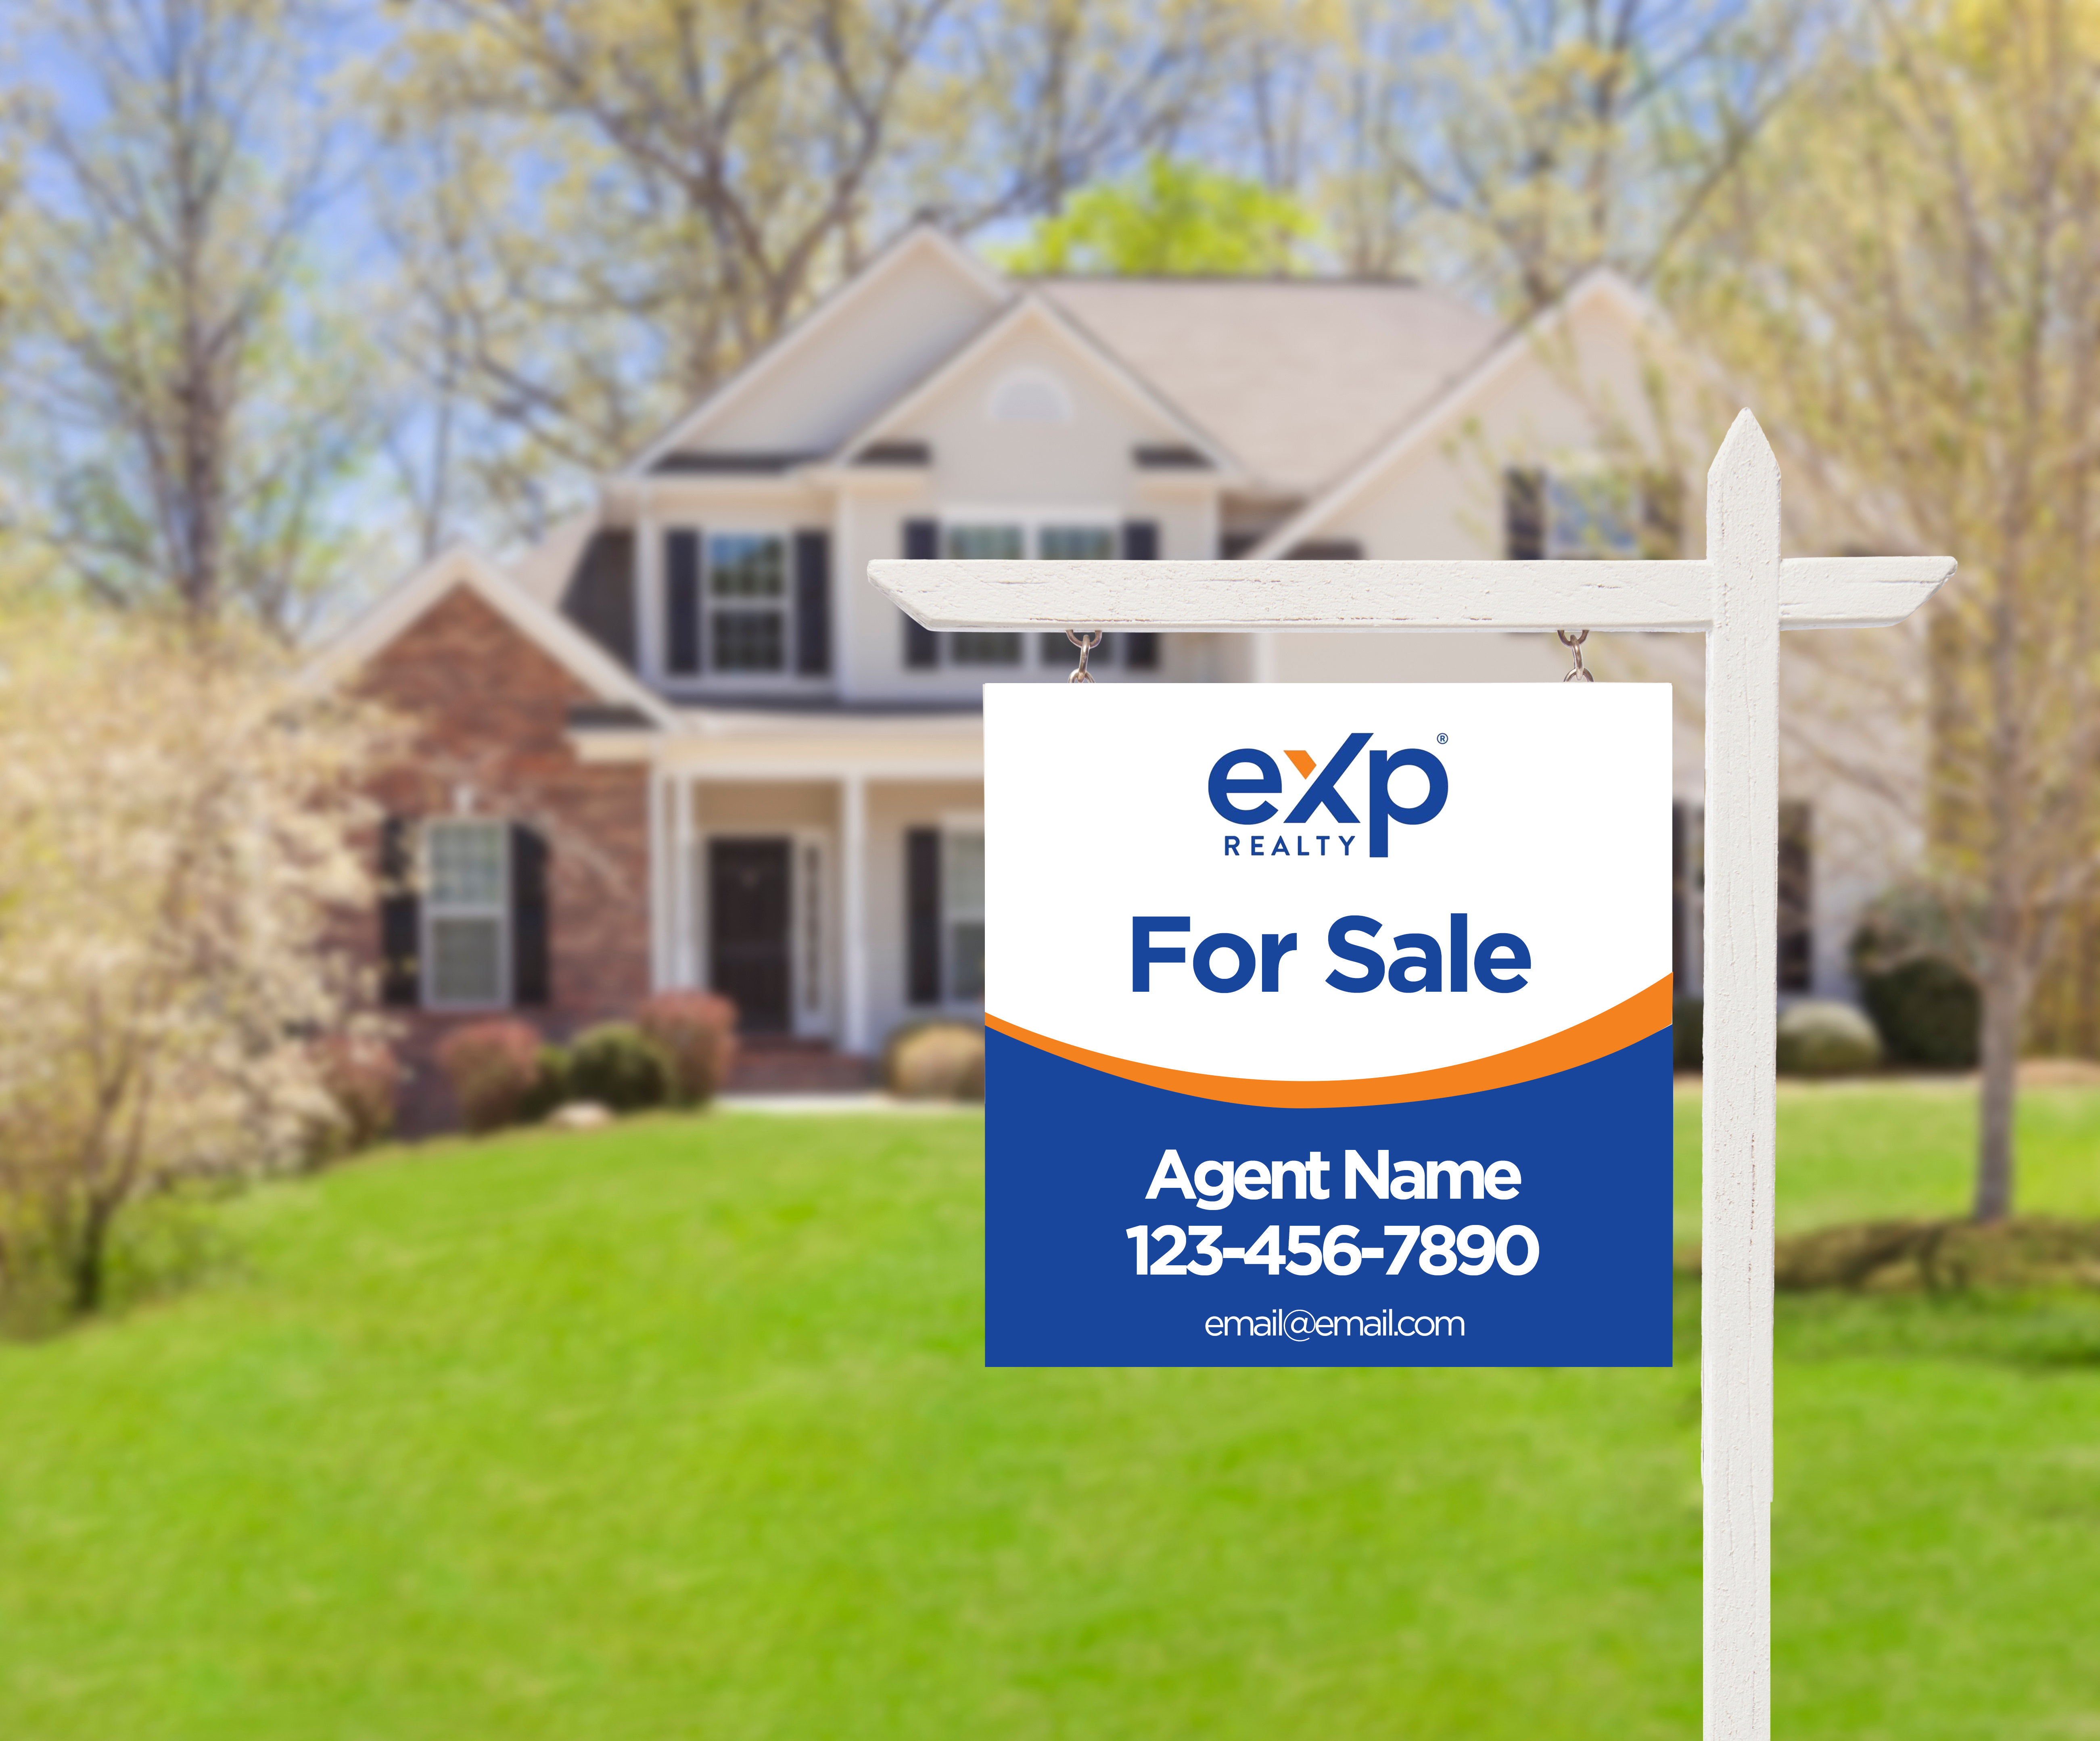 EXP Realty For Sale Sign